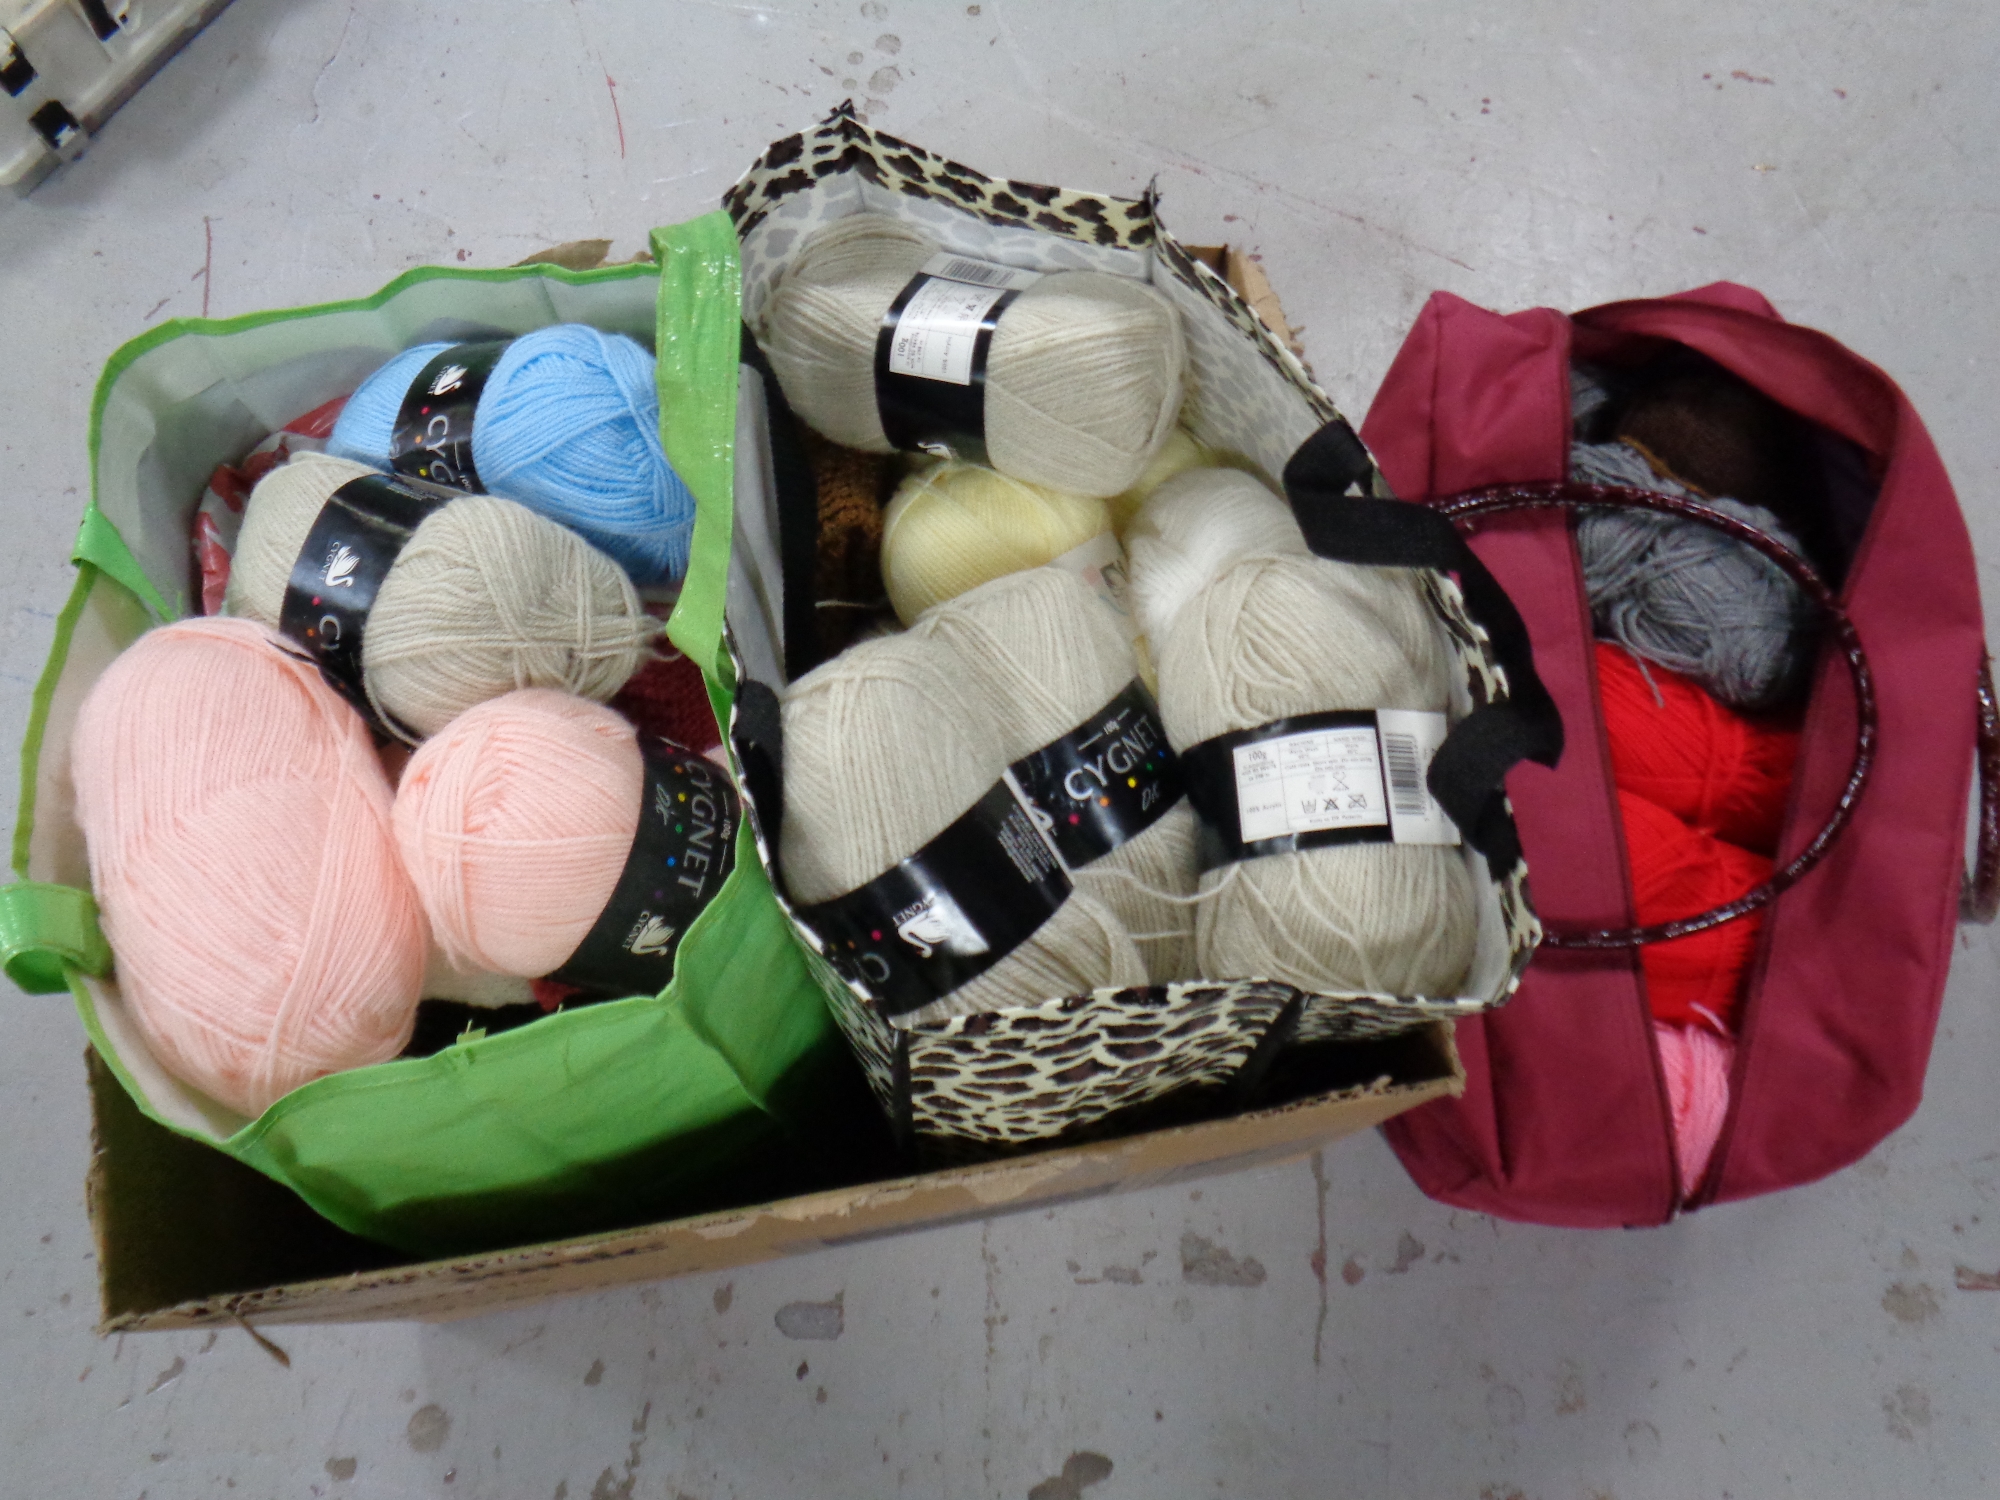 A box and a bag containing wool